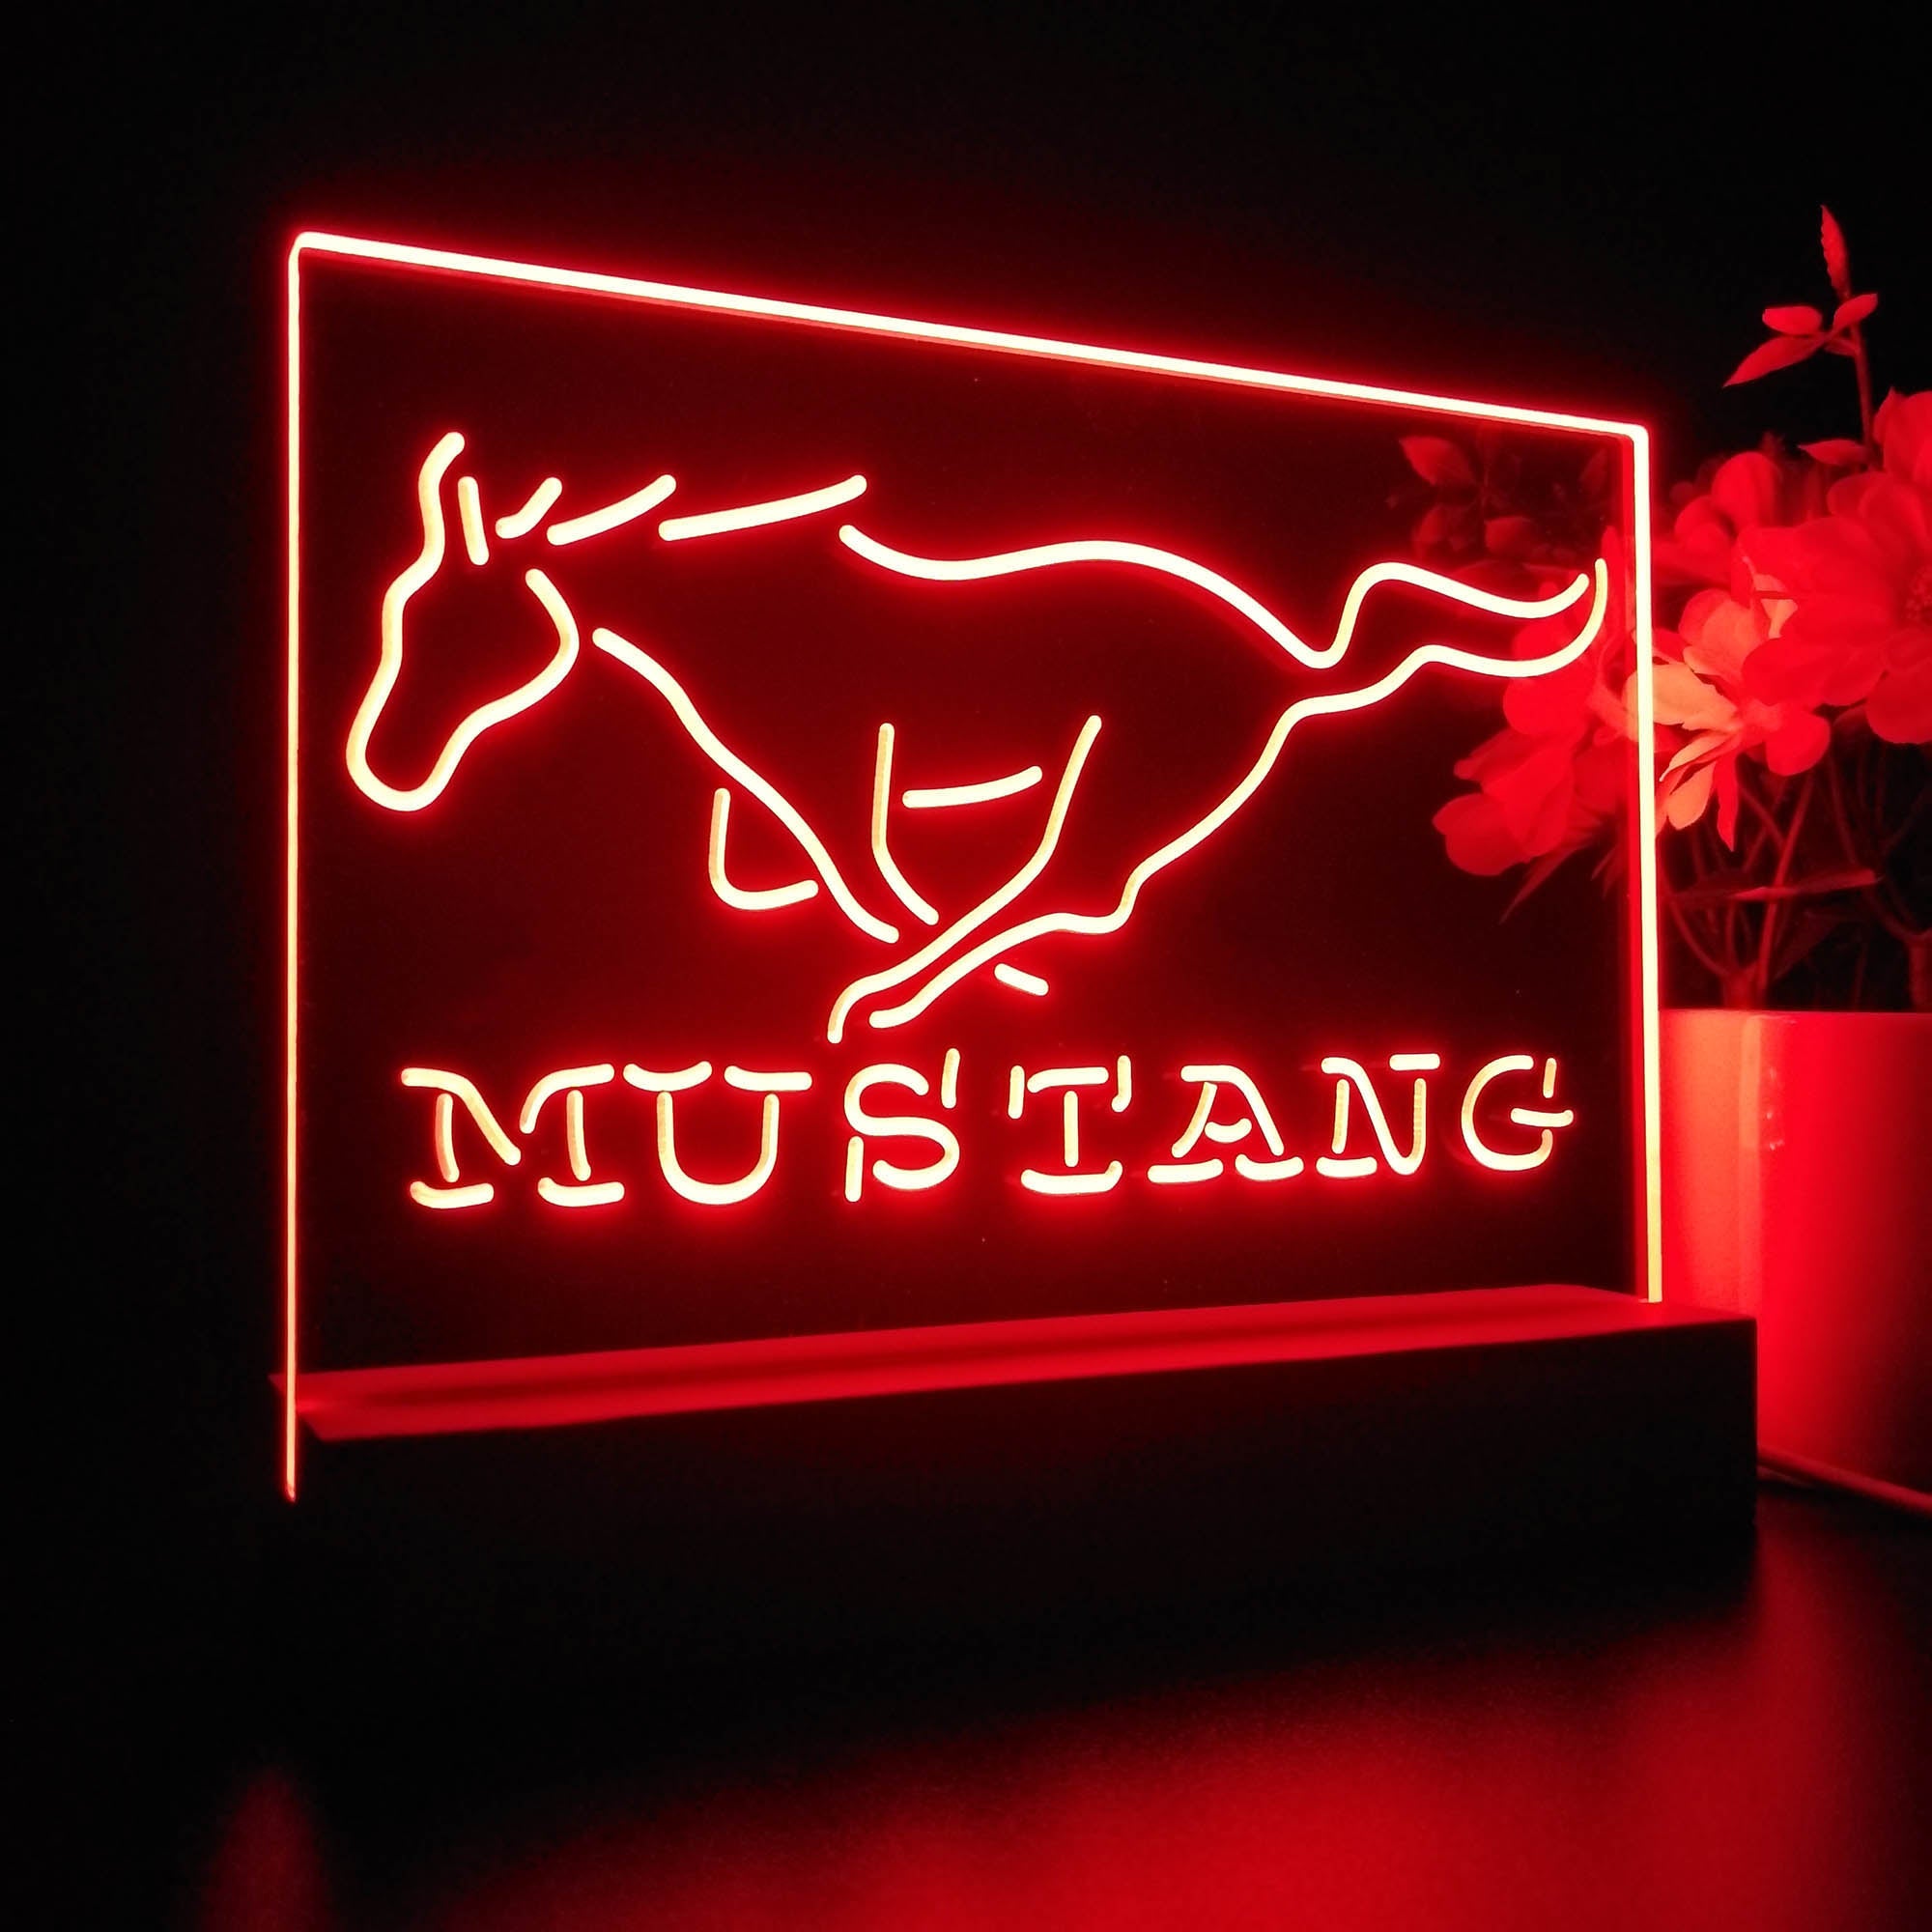 Mustang Ford 3D LED Illusion Night Light